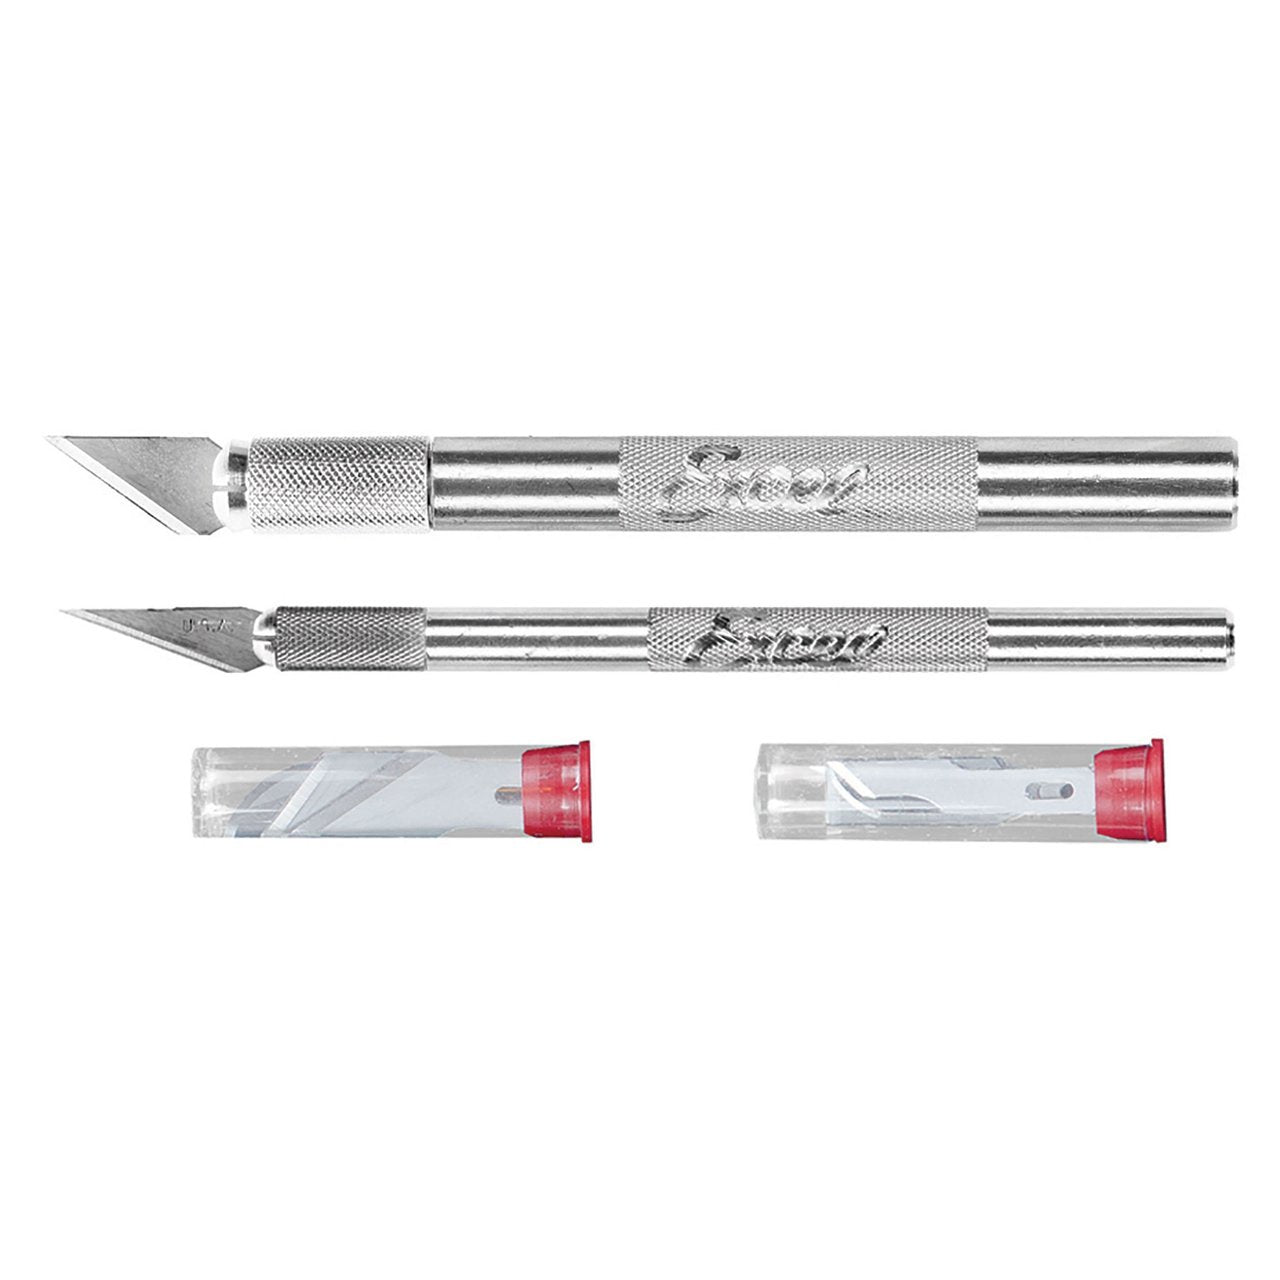 Excel Basic Knife Set #1 and #2 w/ 10 Blades EXC19062